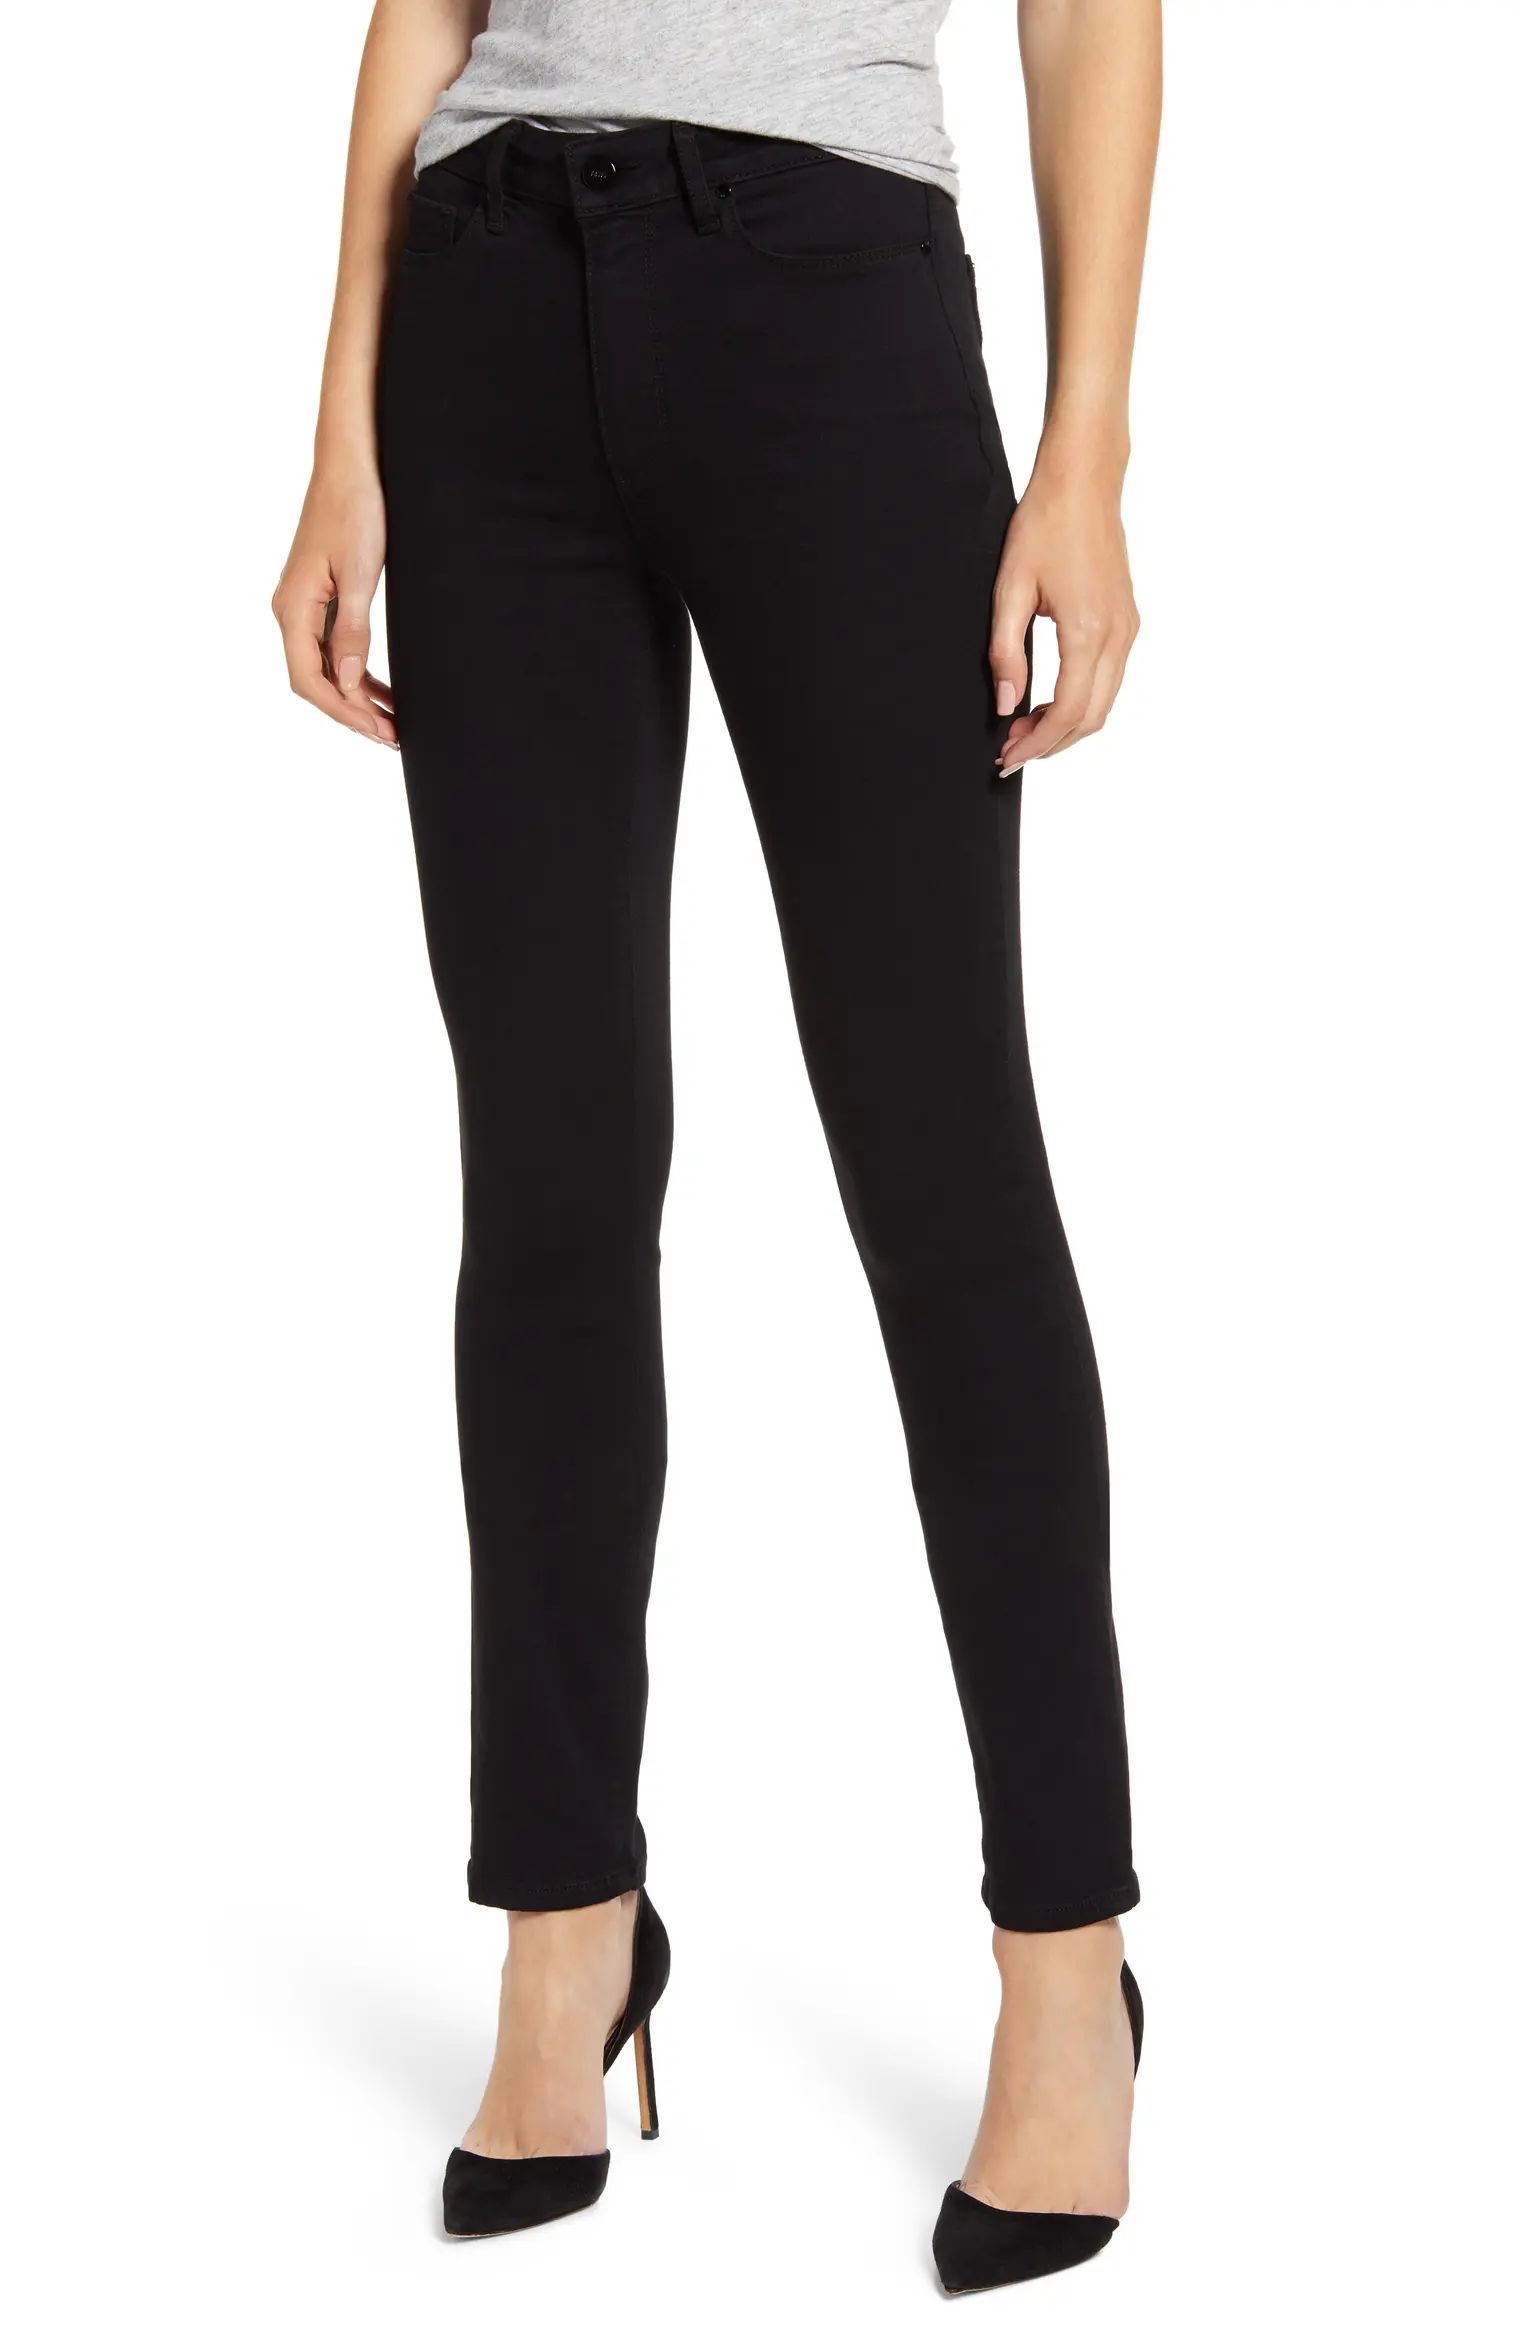 Rating 4.6out of5stars(16)16Transcend - Hoxton High Waist Skinny JeansPAIGE | Nordstrom